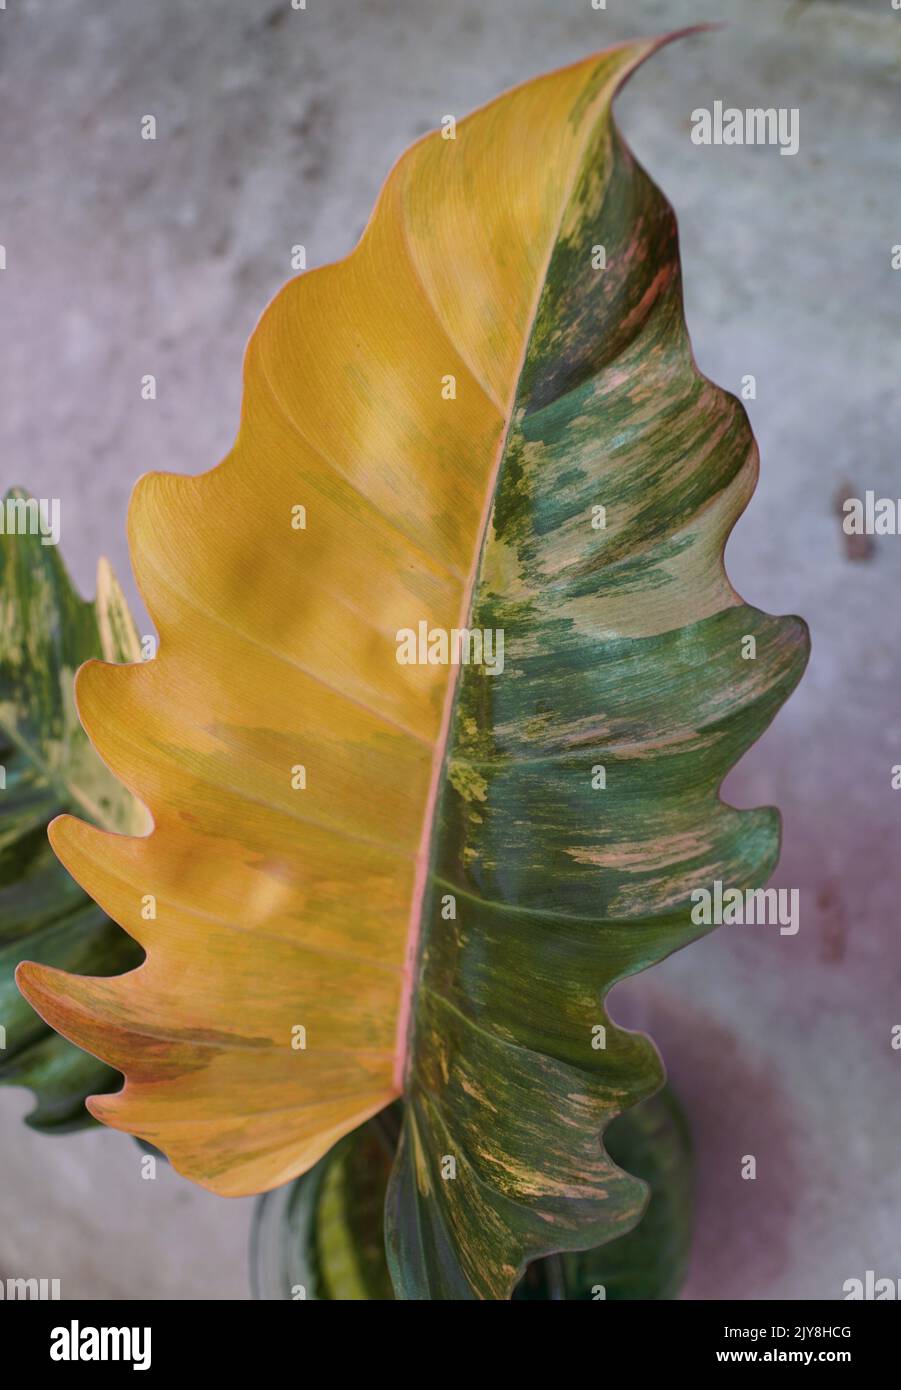 Stunning variegated half-moon leaf of Philodendron Caramel Marble, a rare tropical plant Stock Photo